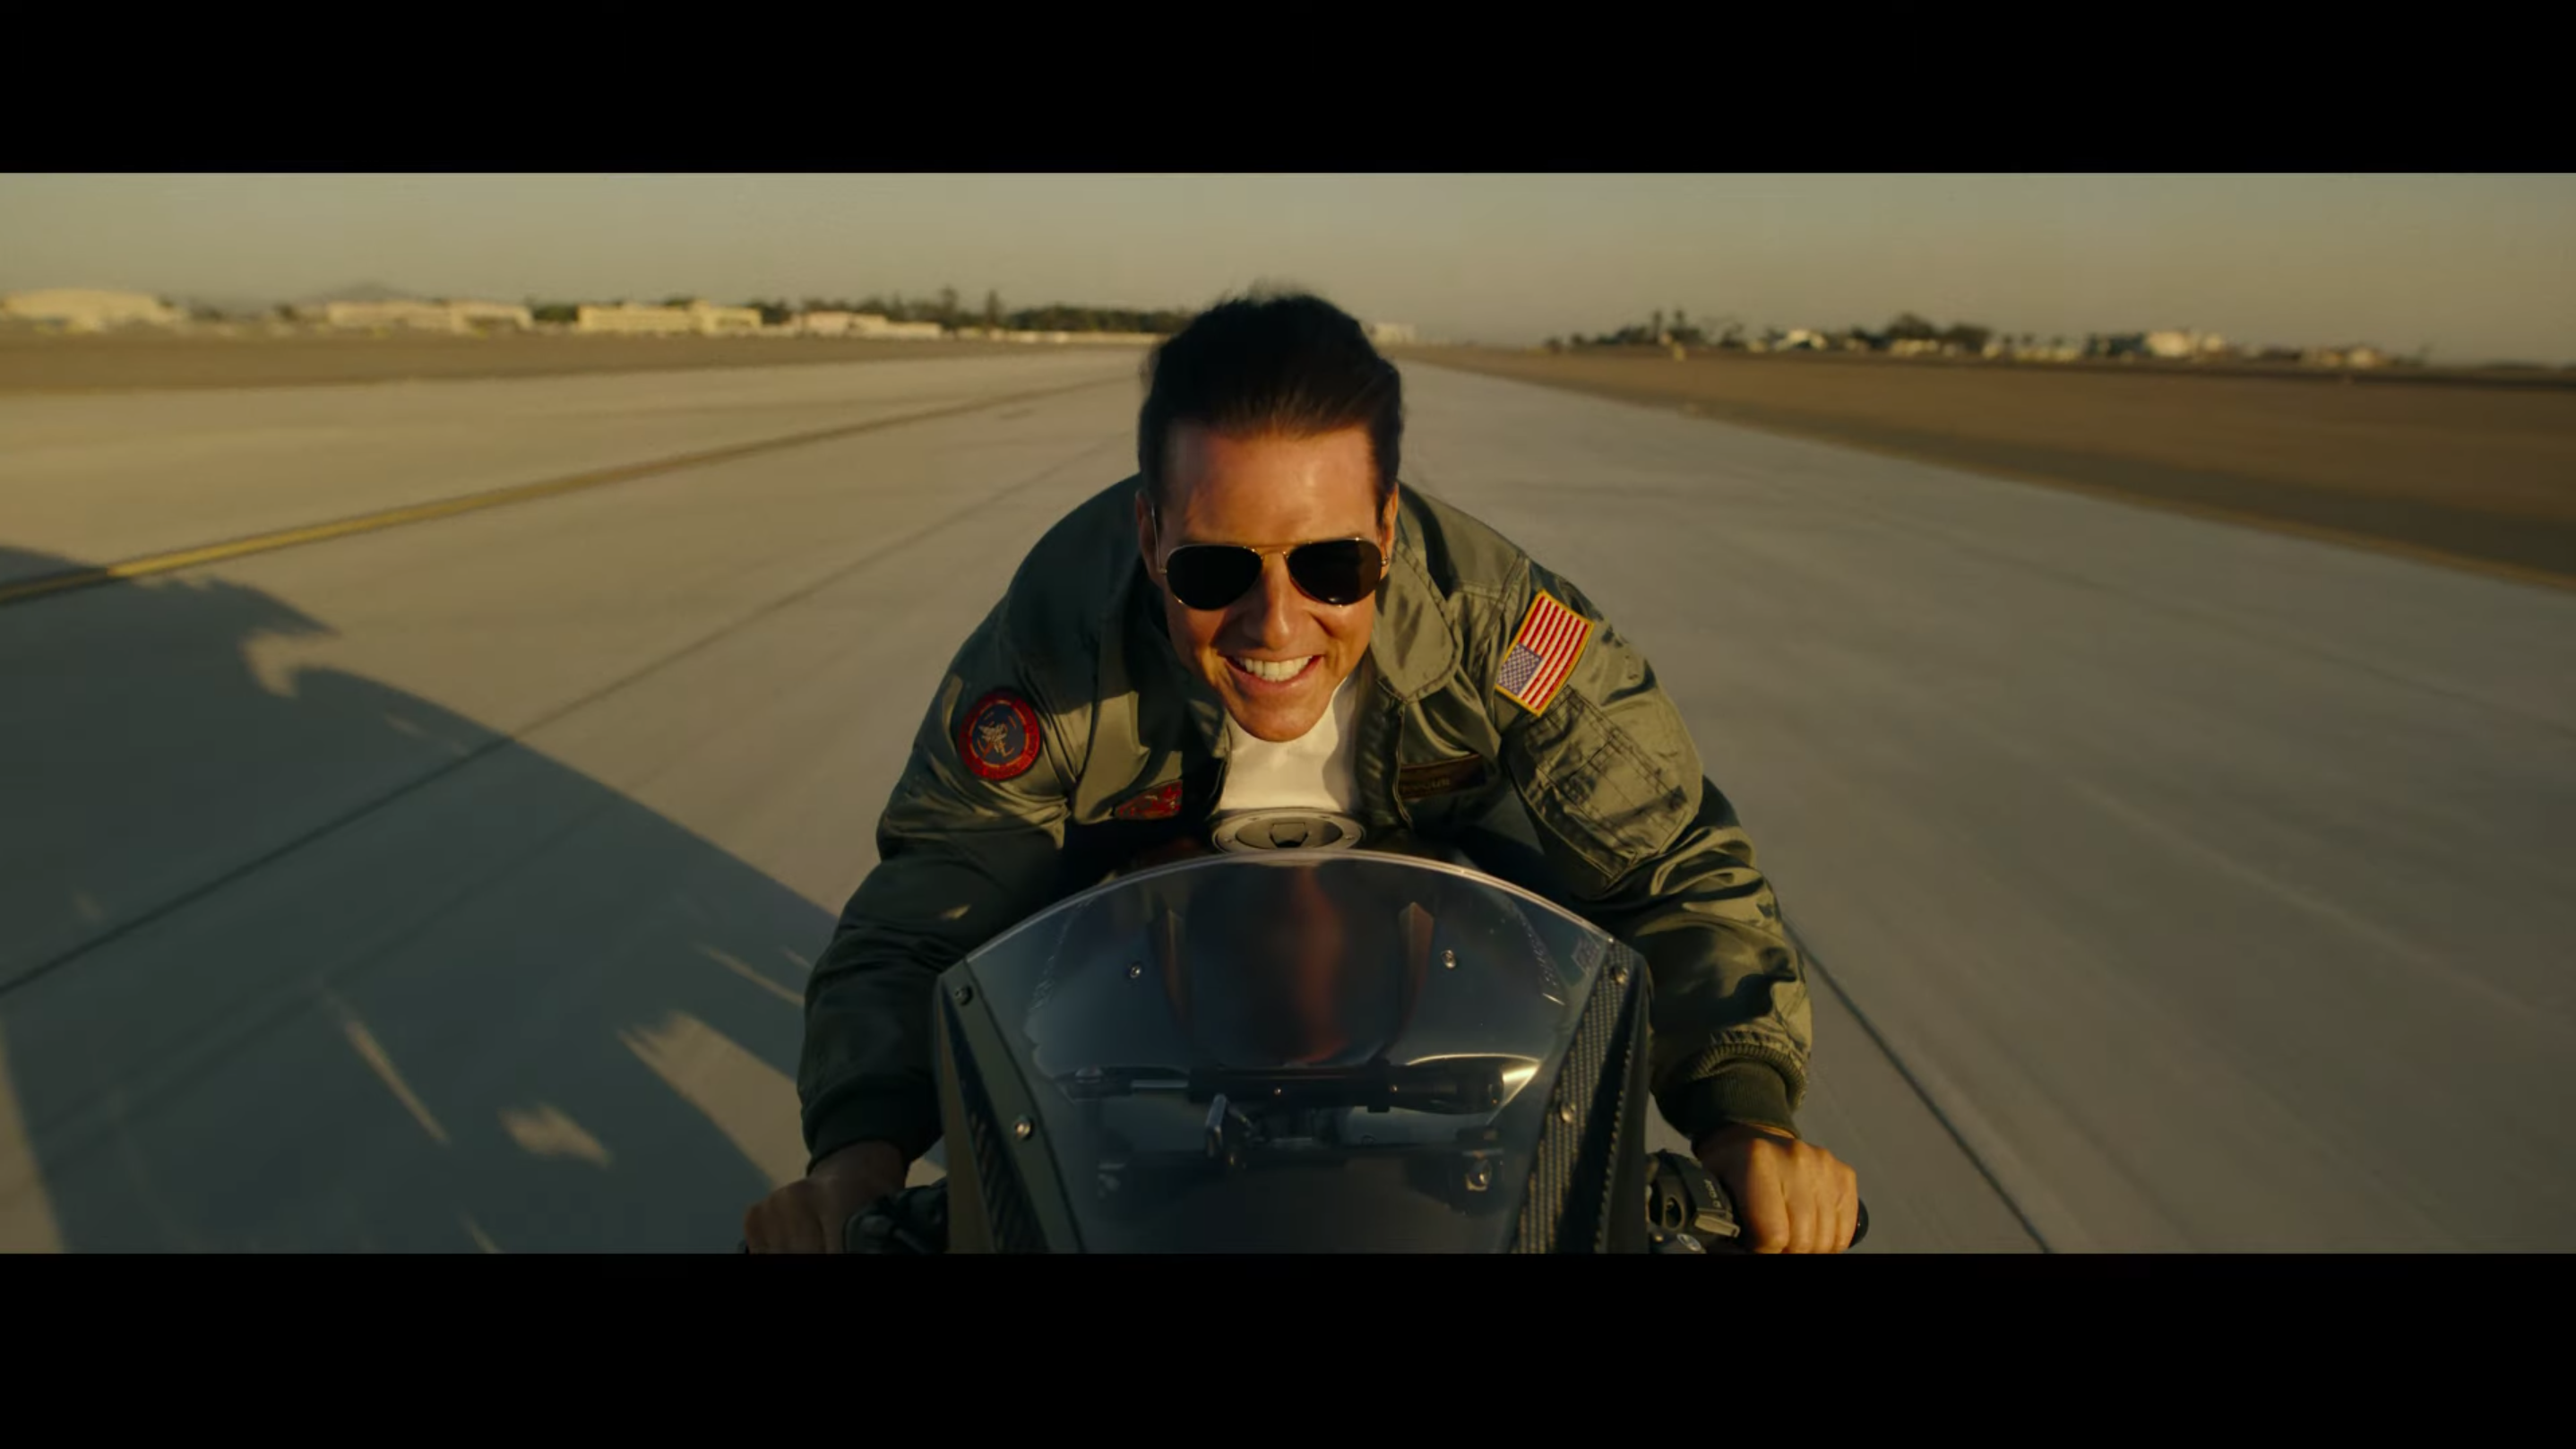 Tom Cruise is back and ready to fly in the trailer for Top Gun: Maverick